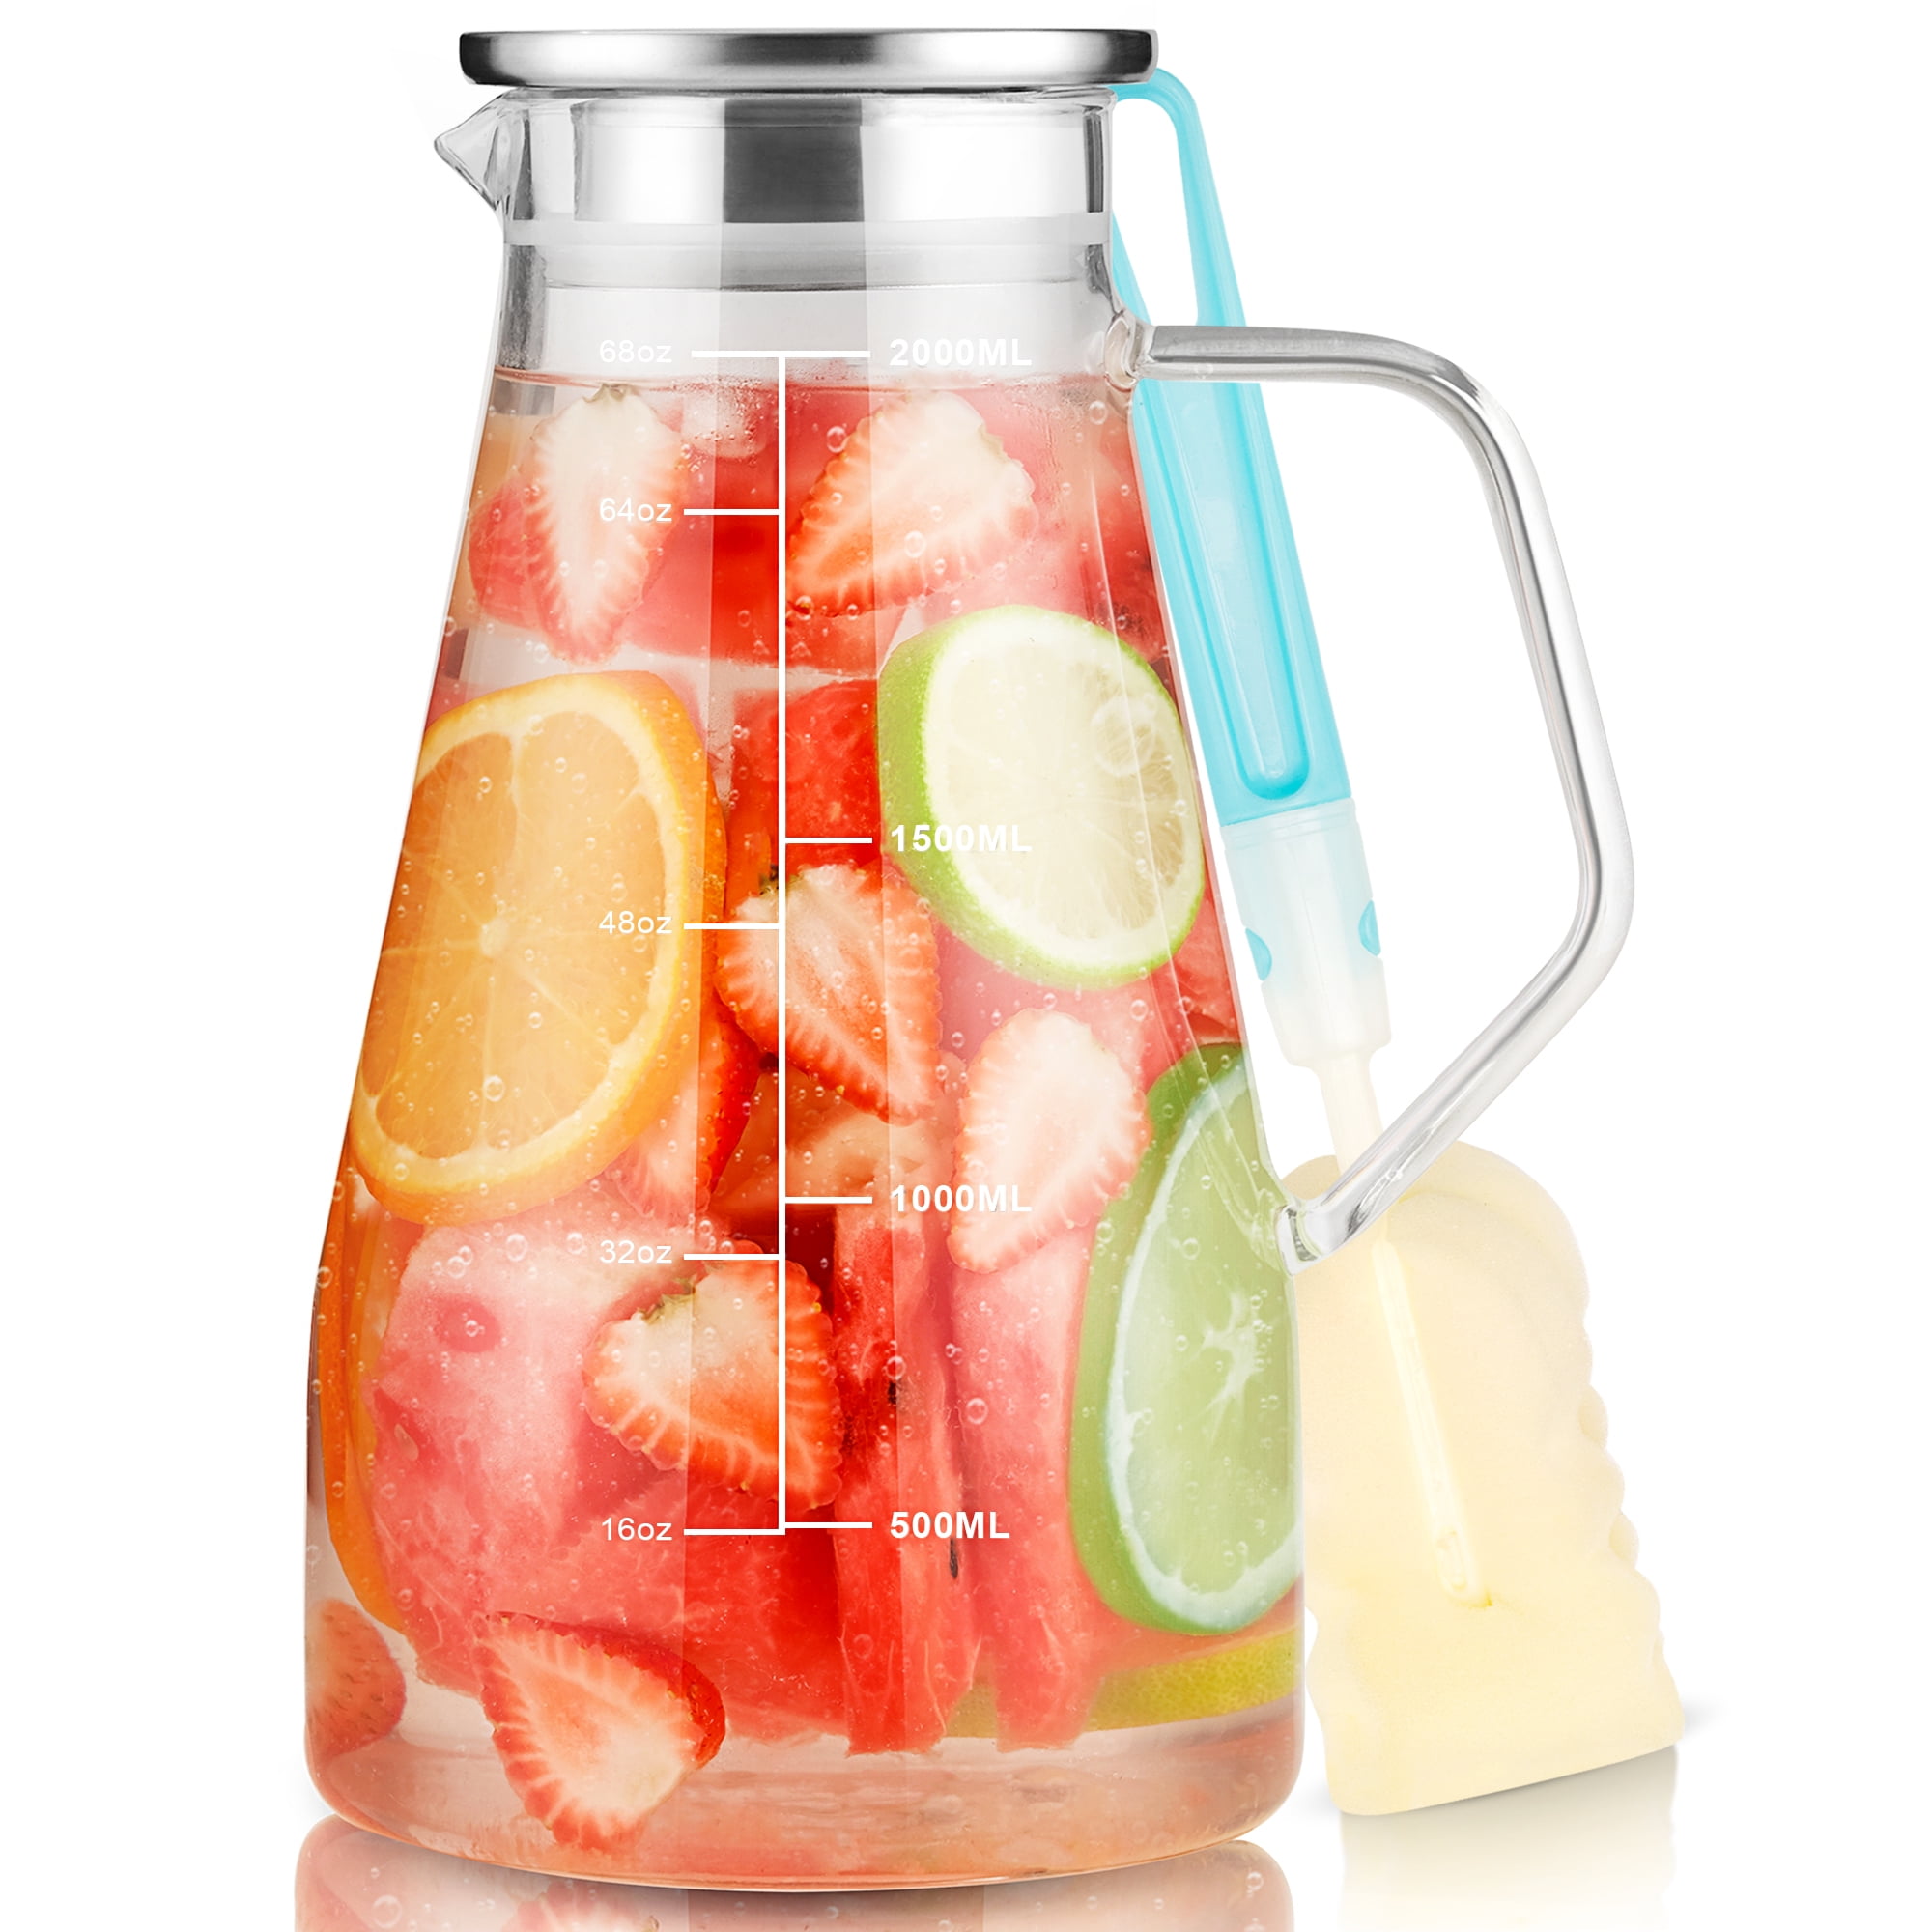 Tribello LARGE 1.3 Gallon Water Pitcher, Plastic Juice Pitcher With Lid -  Dishwasher Safe, BPA Free, Colors May Vary (1.3 Gallon)